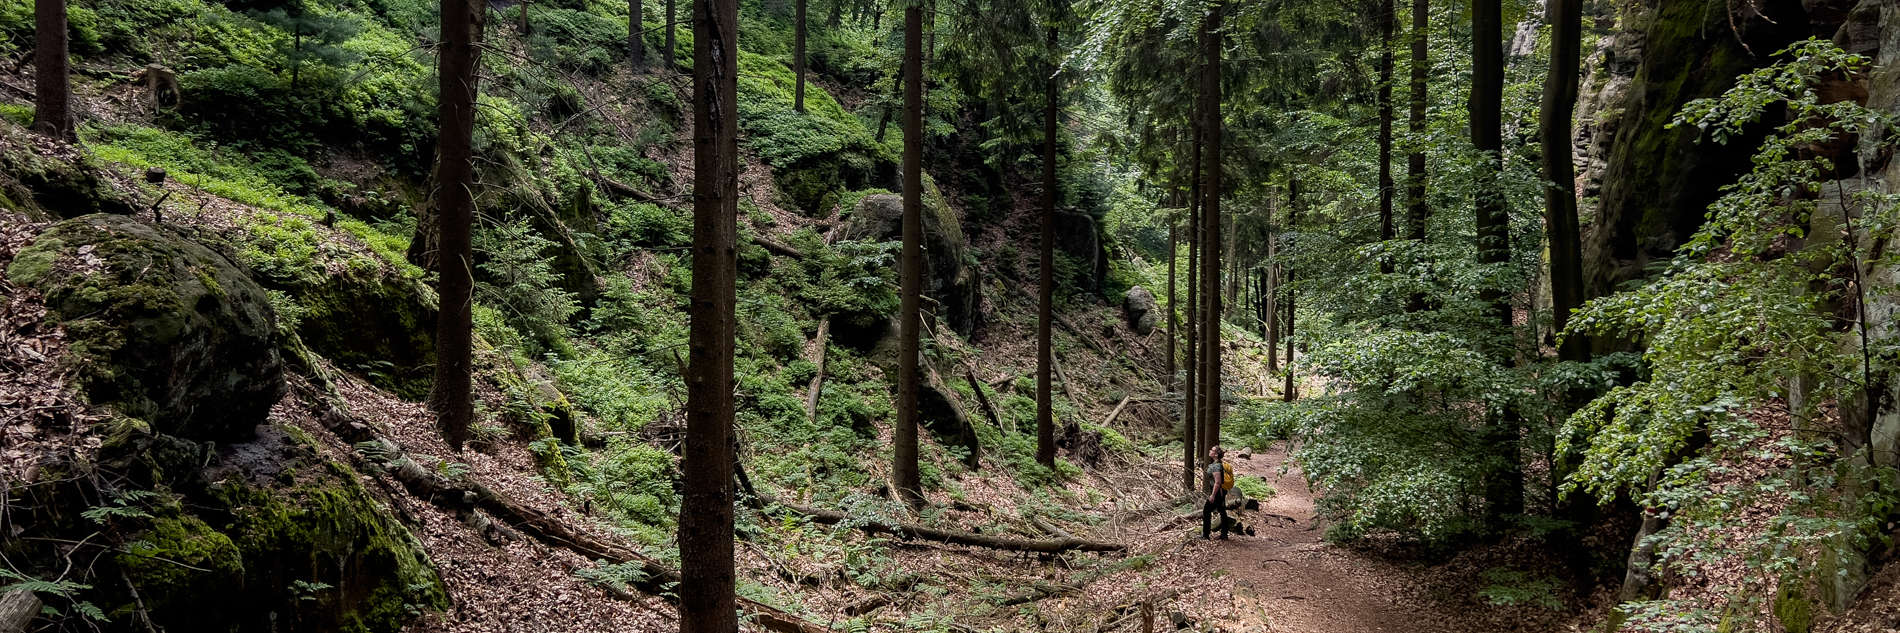 A hiker on an orange pathway deep within a forest in the Czech Republic.